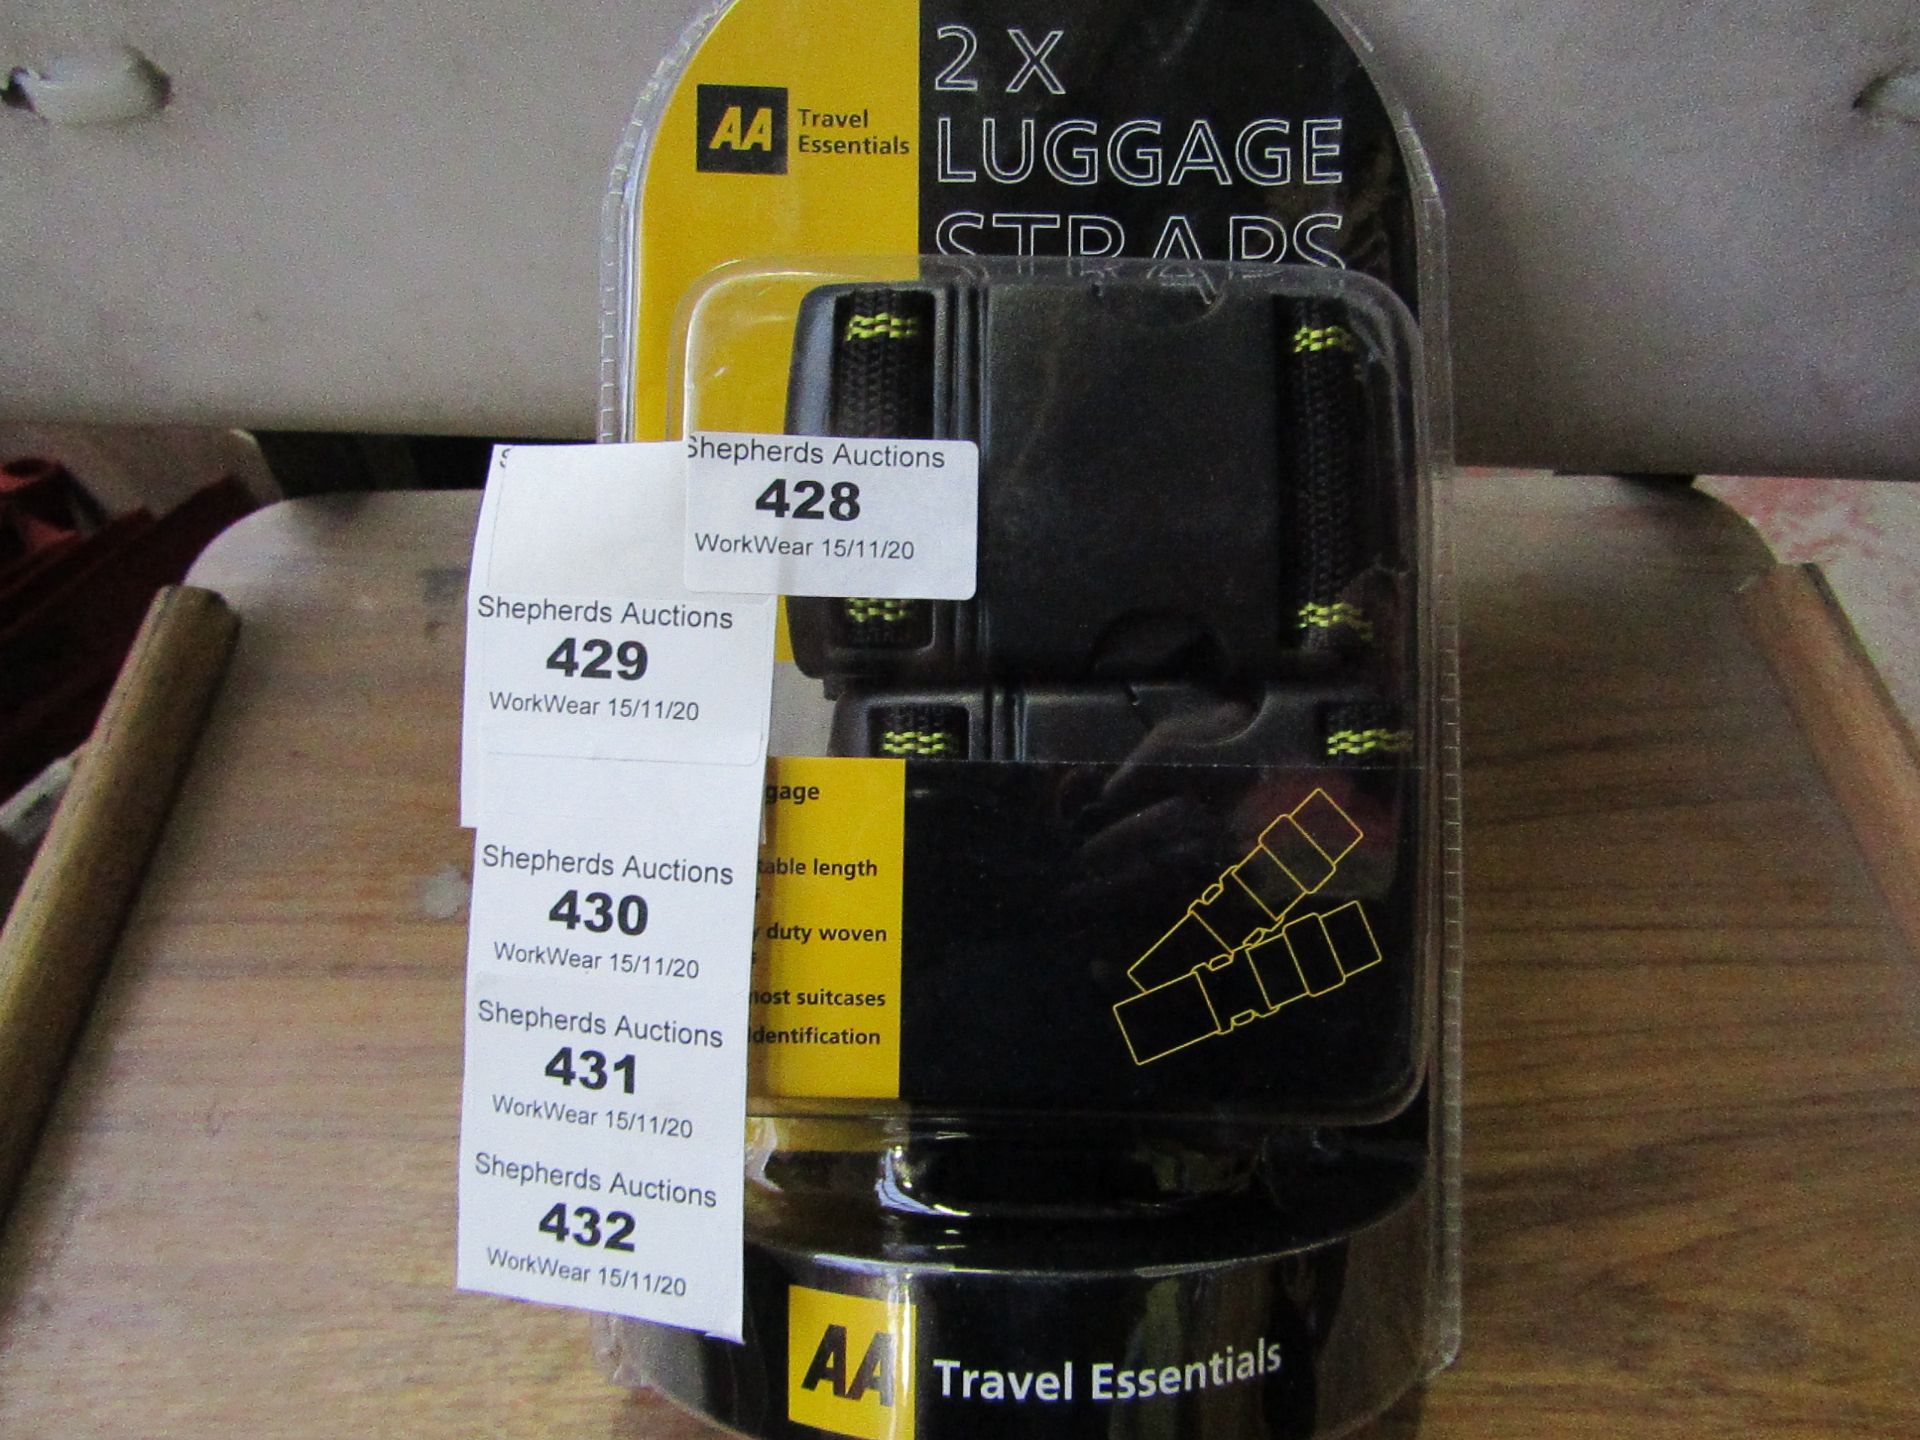 4x AA - Luggage Straps (2 Pack) - New & Packaged.